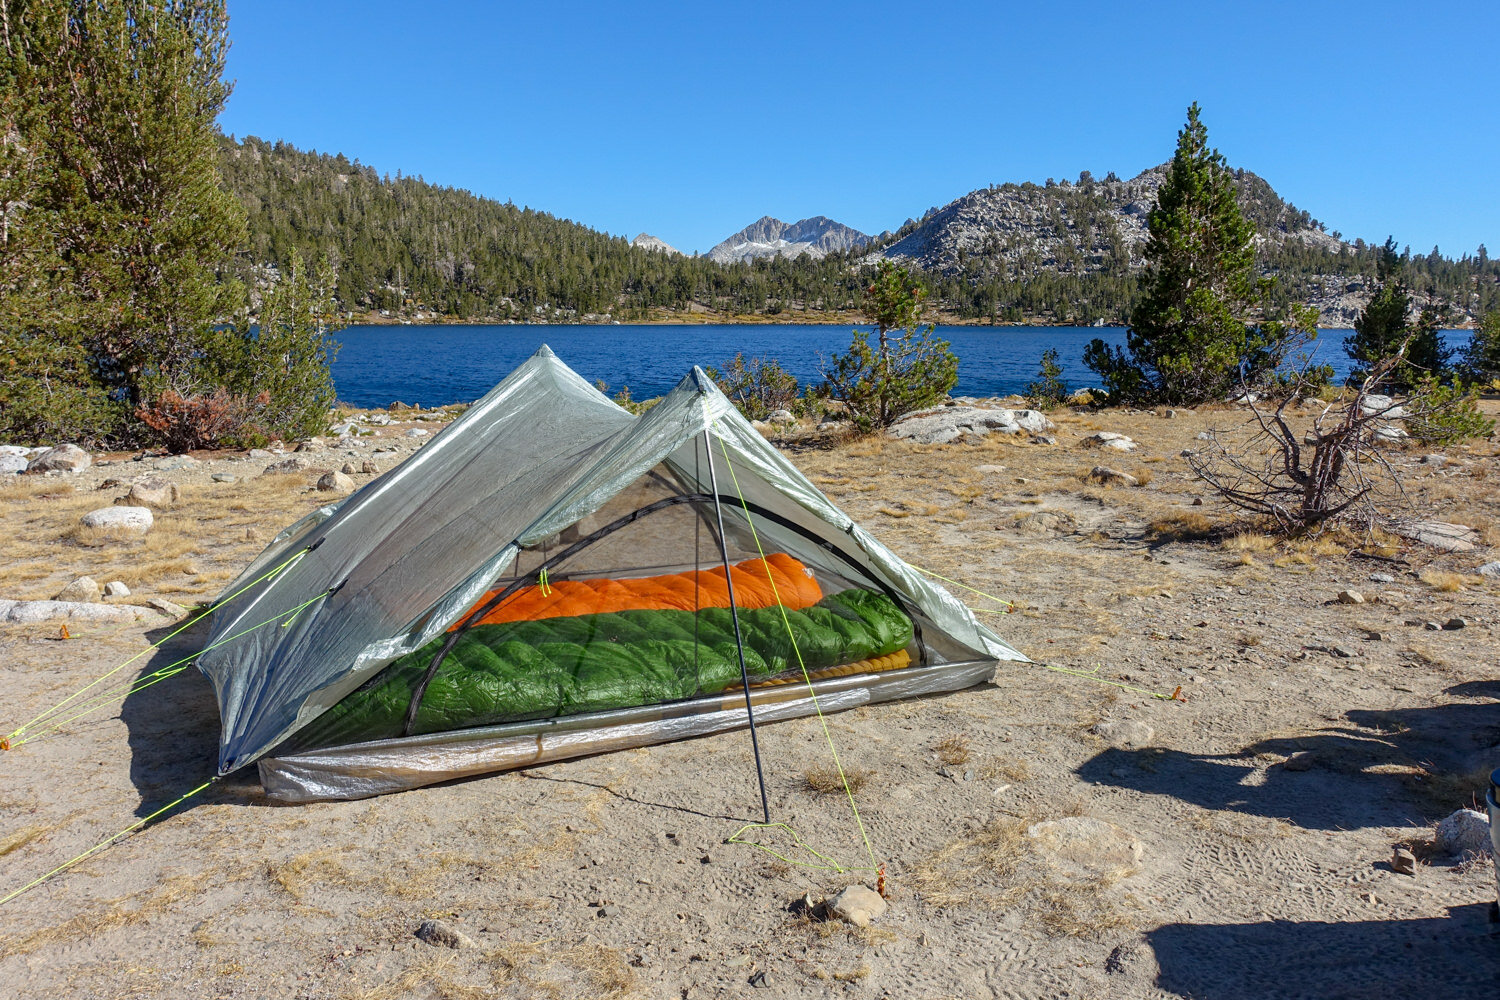 The Zpacks Triplex is our favorite ultralight tent for sleeping two hikers.